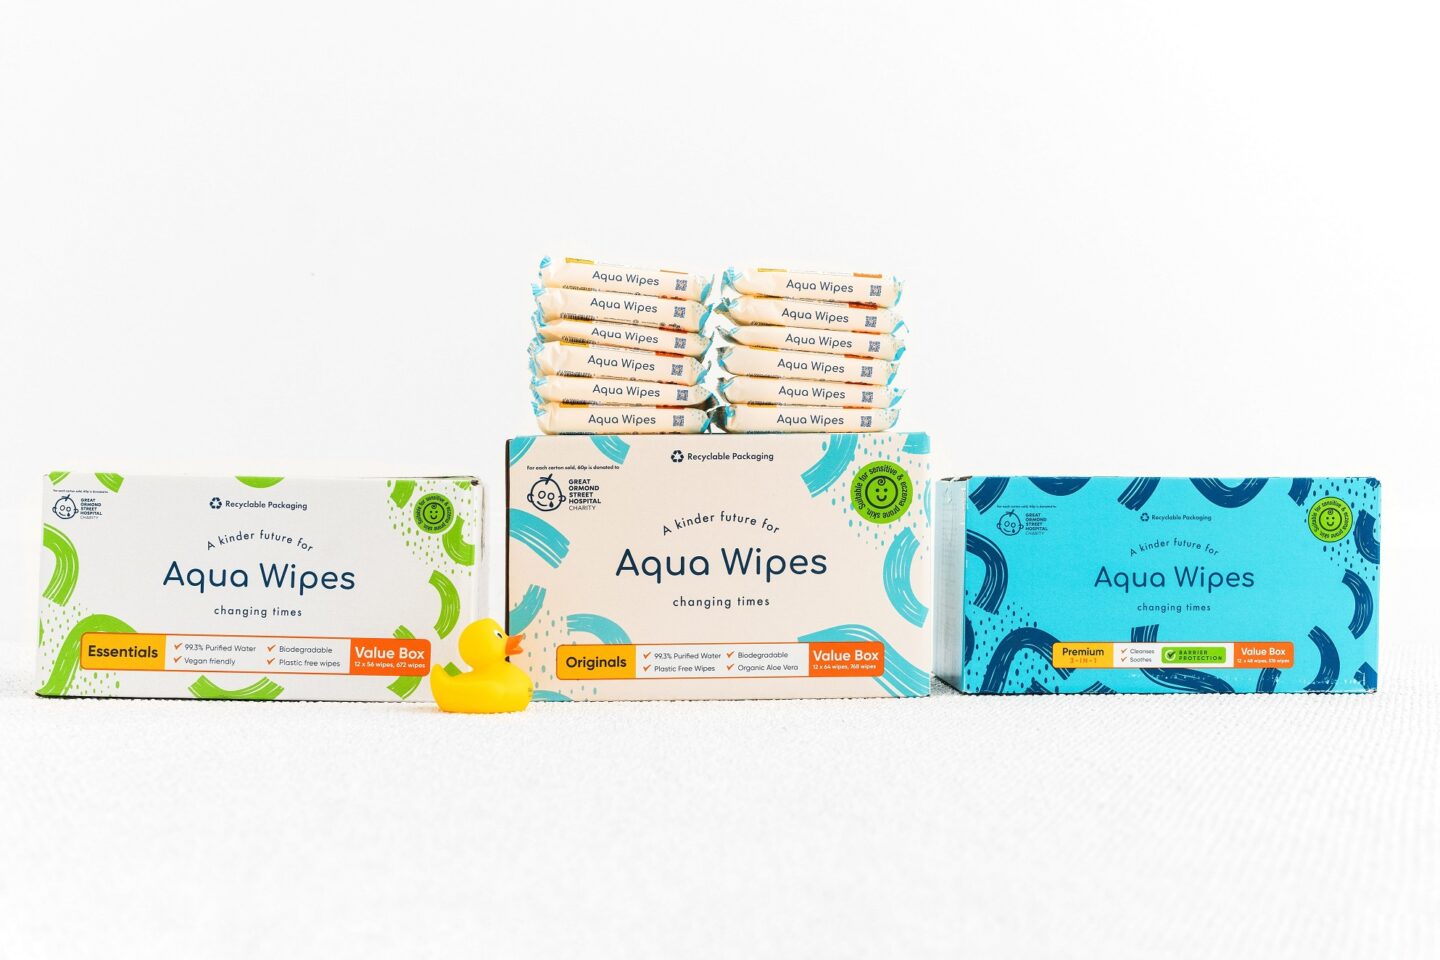  Aqua Wipes Bundle, Eco-friendly wipes, Baby Wipes, Baby products, plastic-free, biodegradable, sustainable, kids products, Xmas Giveaways, win, competition, the Frenchie Mummy, Aqua Wipes